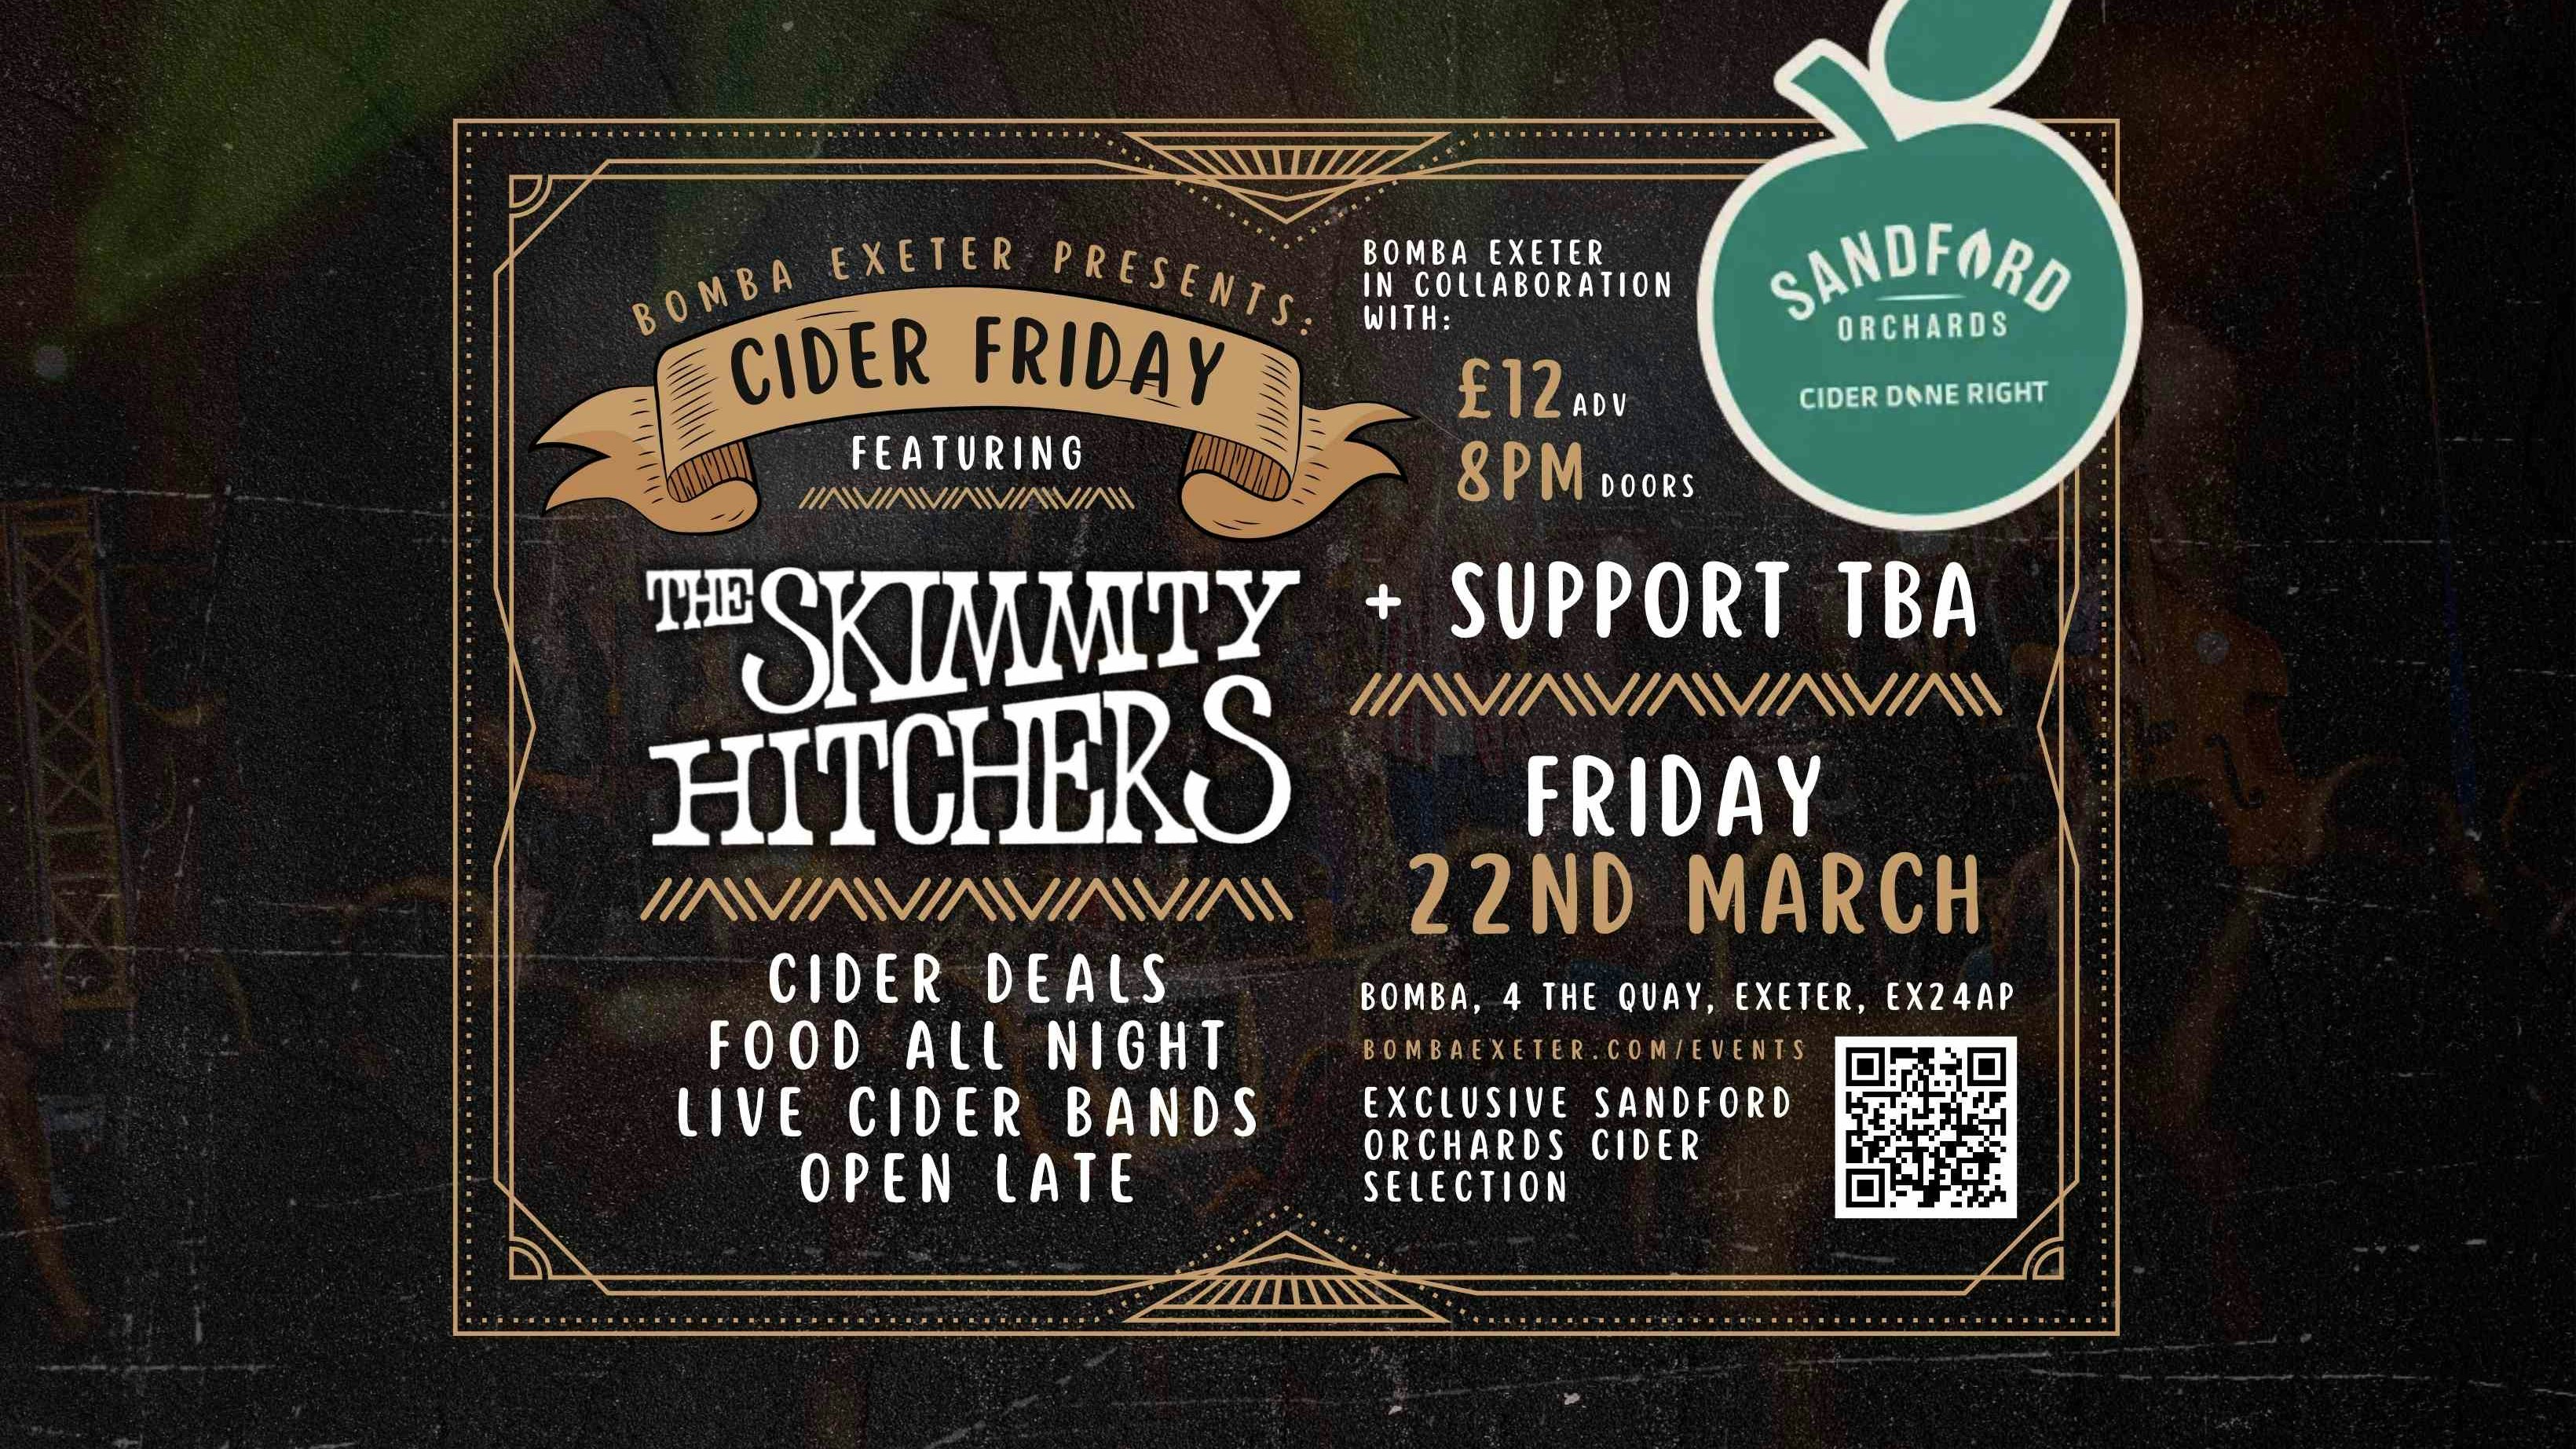 CIDER FRIDAY w/ Skimmity Hitchers at Bomba Exeter (In Collaboration w/ Sandford Orchards)